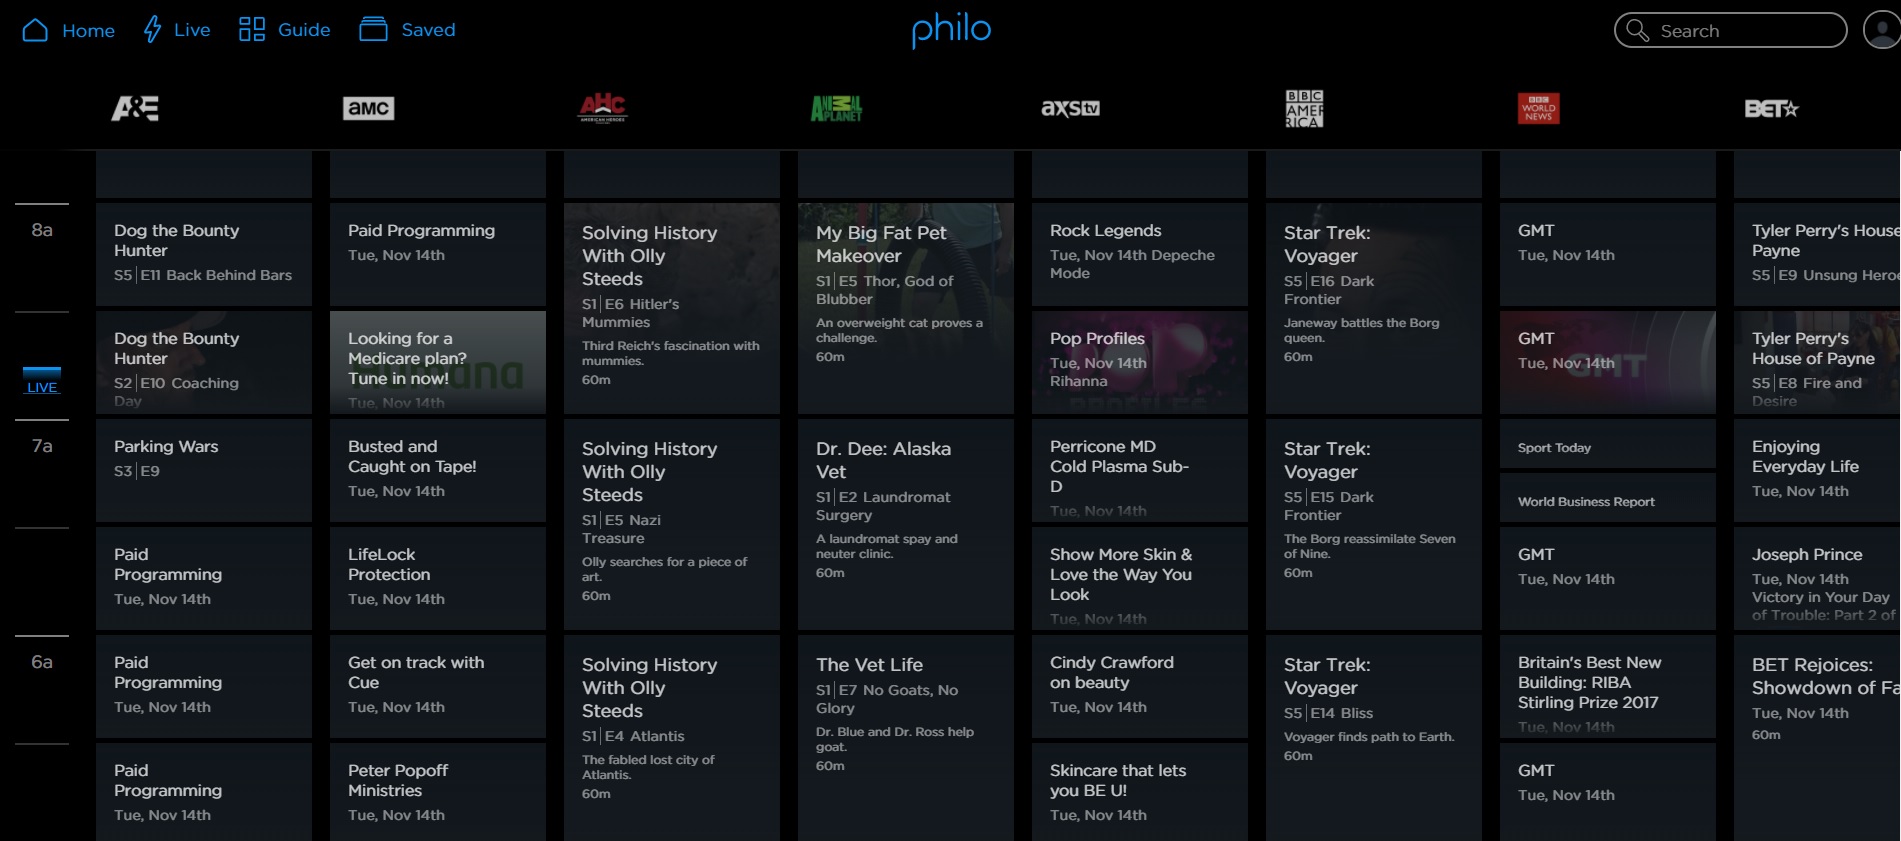 Philo Just Rolled Out a New Guide on Roku Players